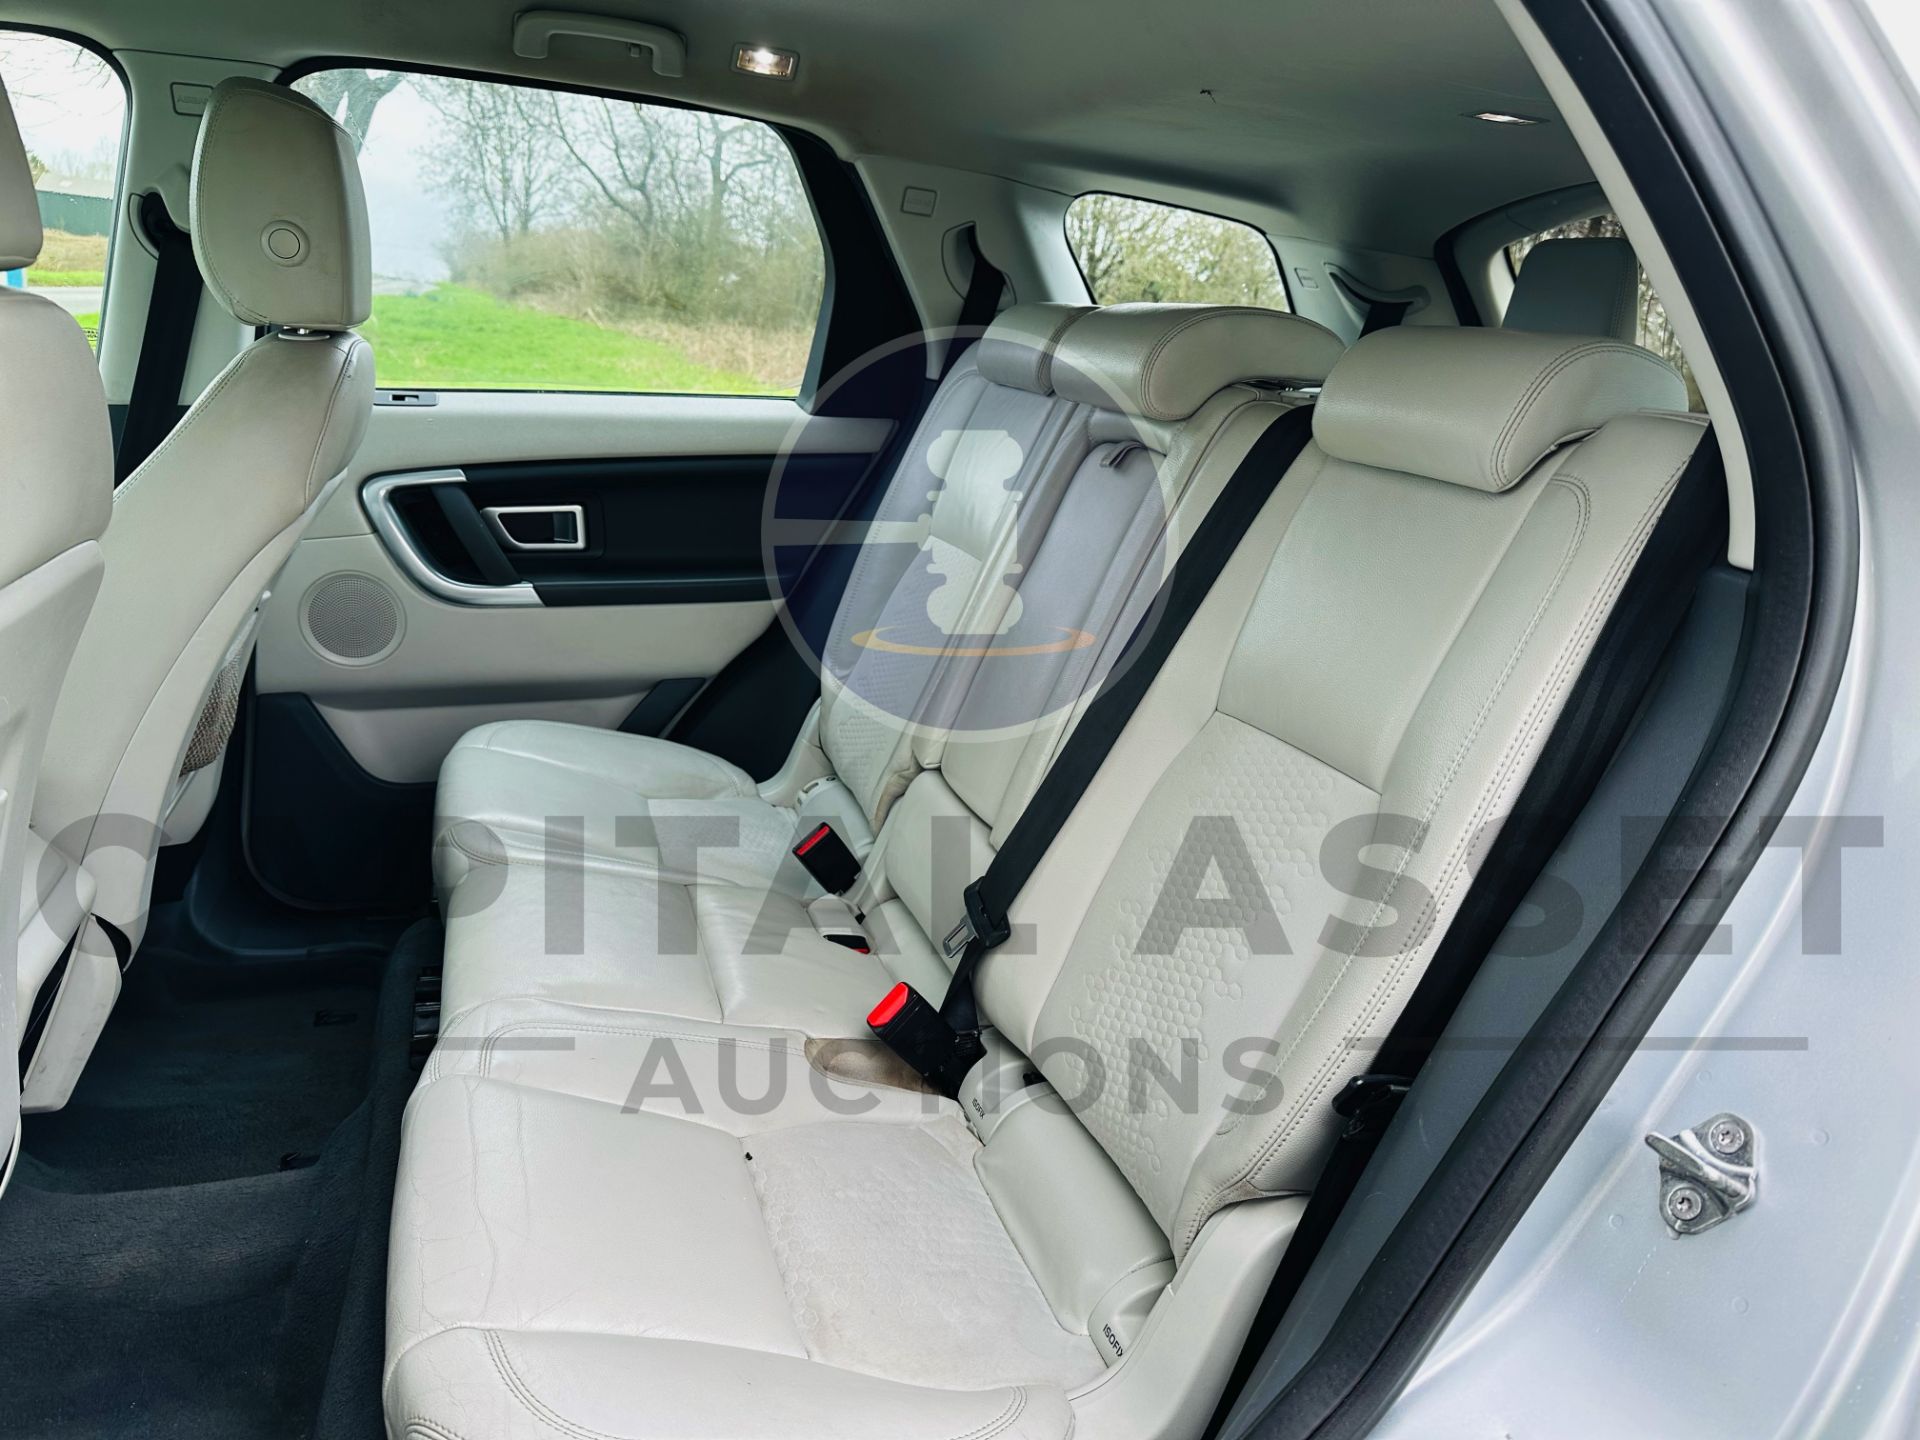 LAND ROVER DISCOVERY SPORT *SE TECH* 7 SEATER SUV (65 REG - EURO 6) 2.0 TD4 - AUTOMATIC - Image 16 of 38